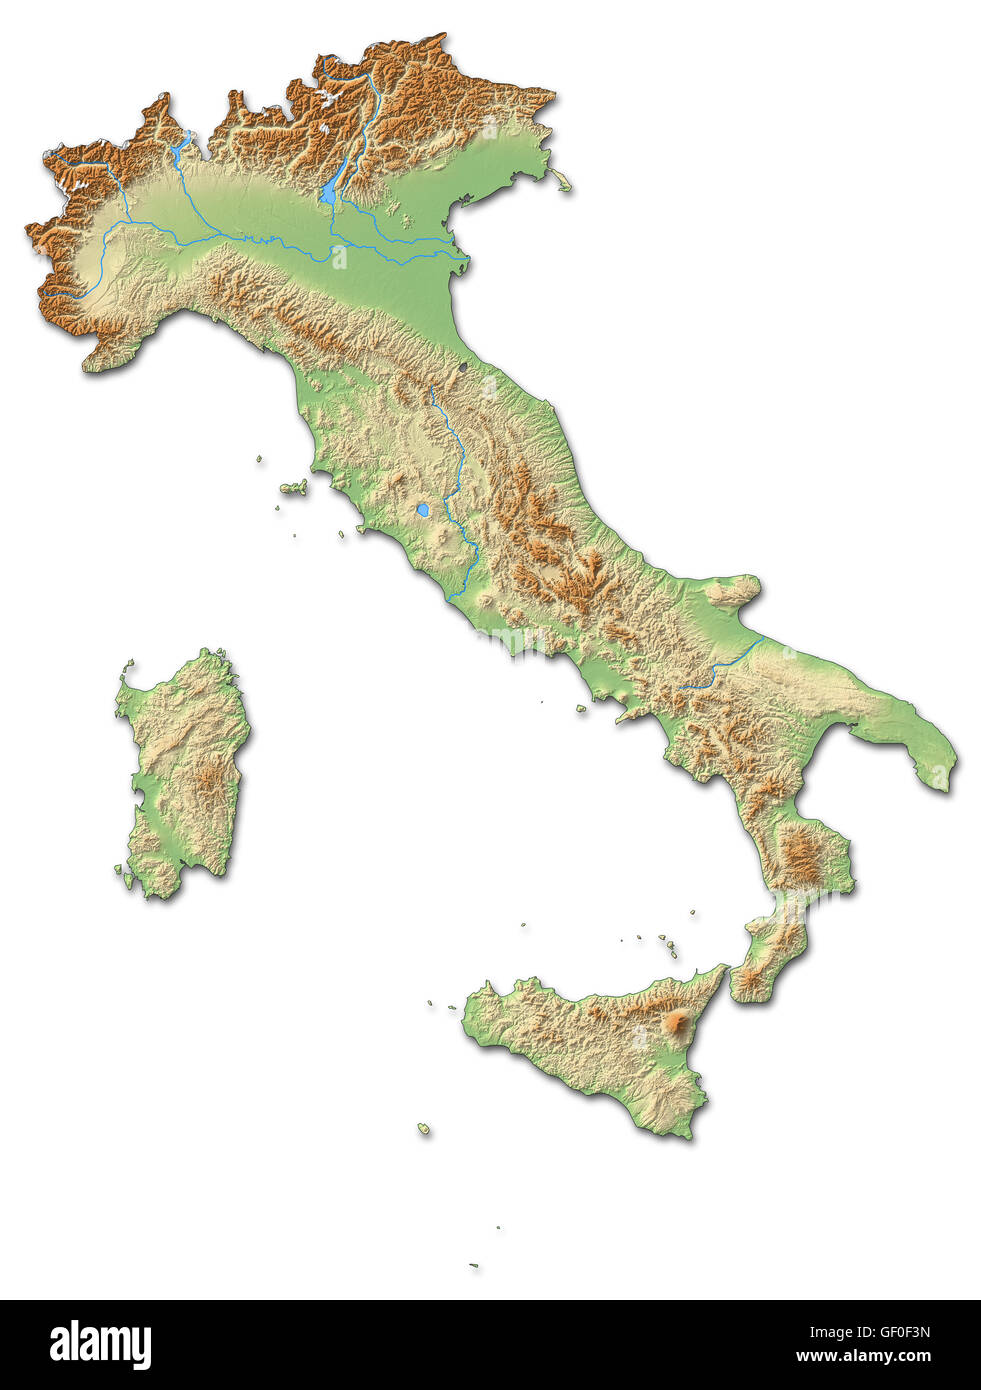 Relief map of Italy with shaded relief Stock Photo - Alamy